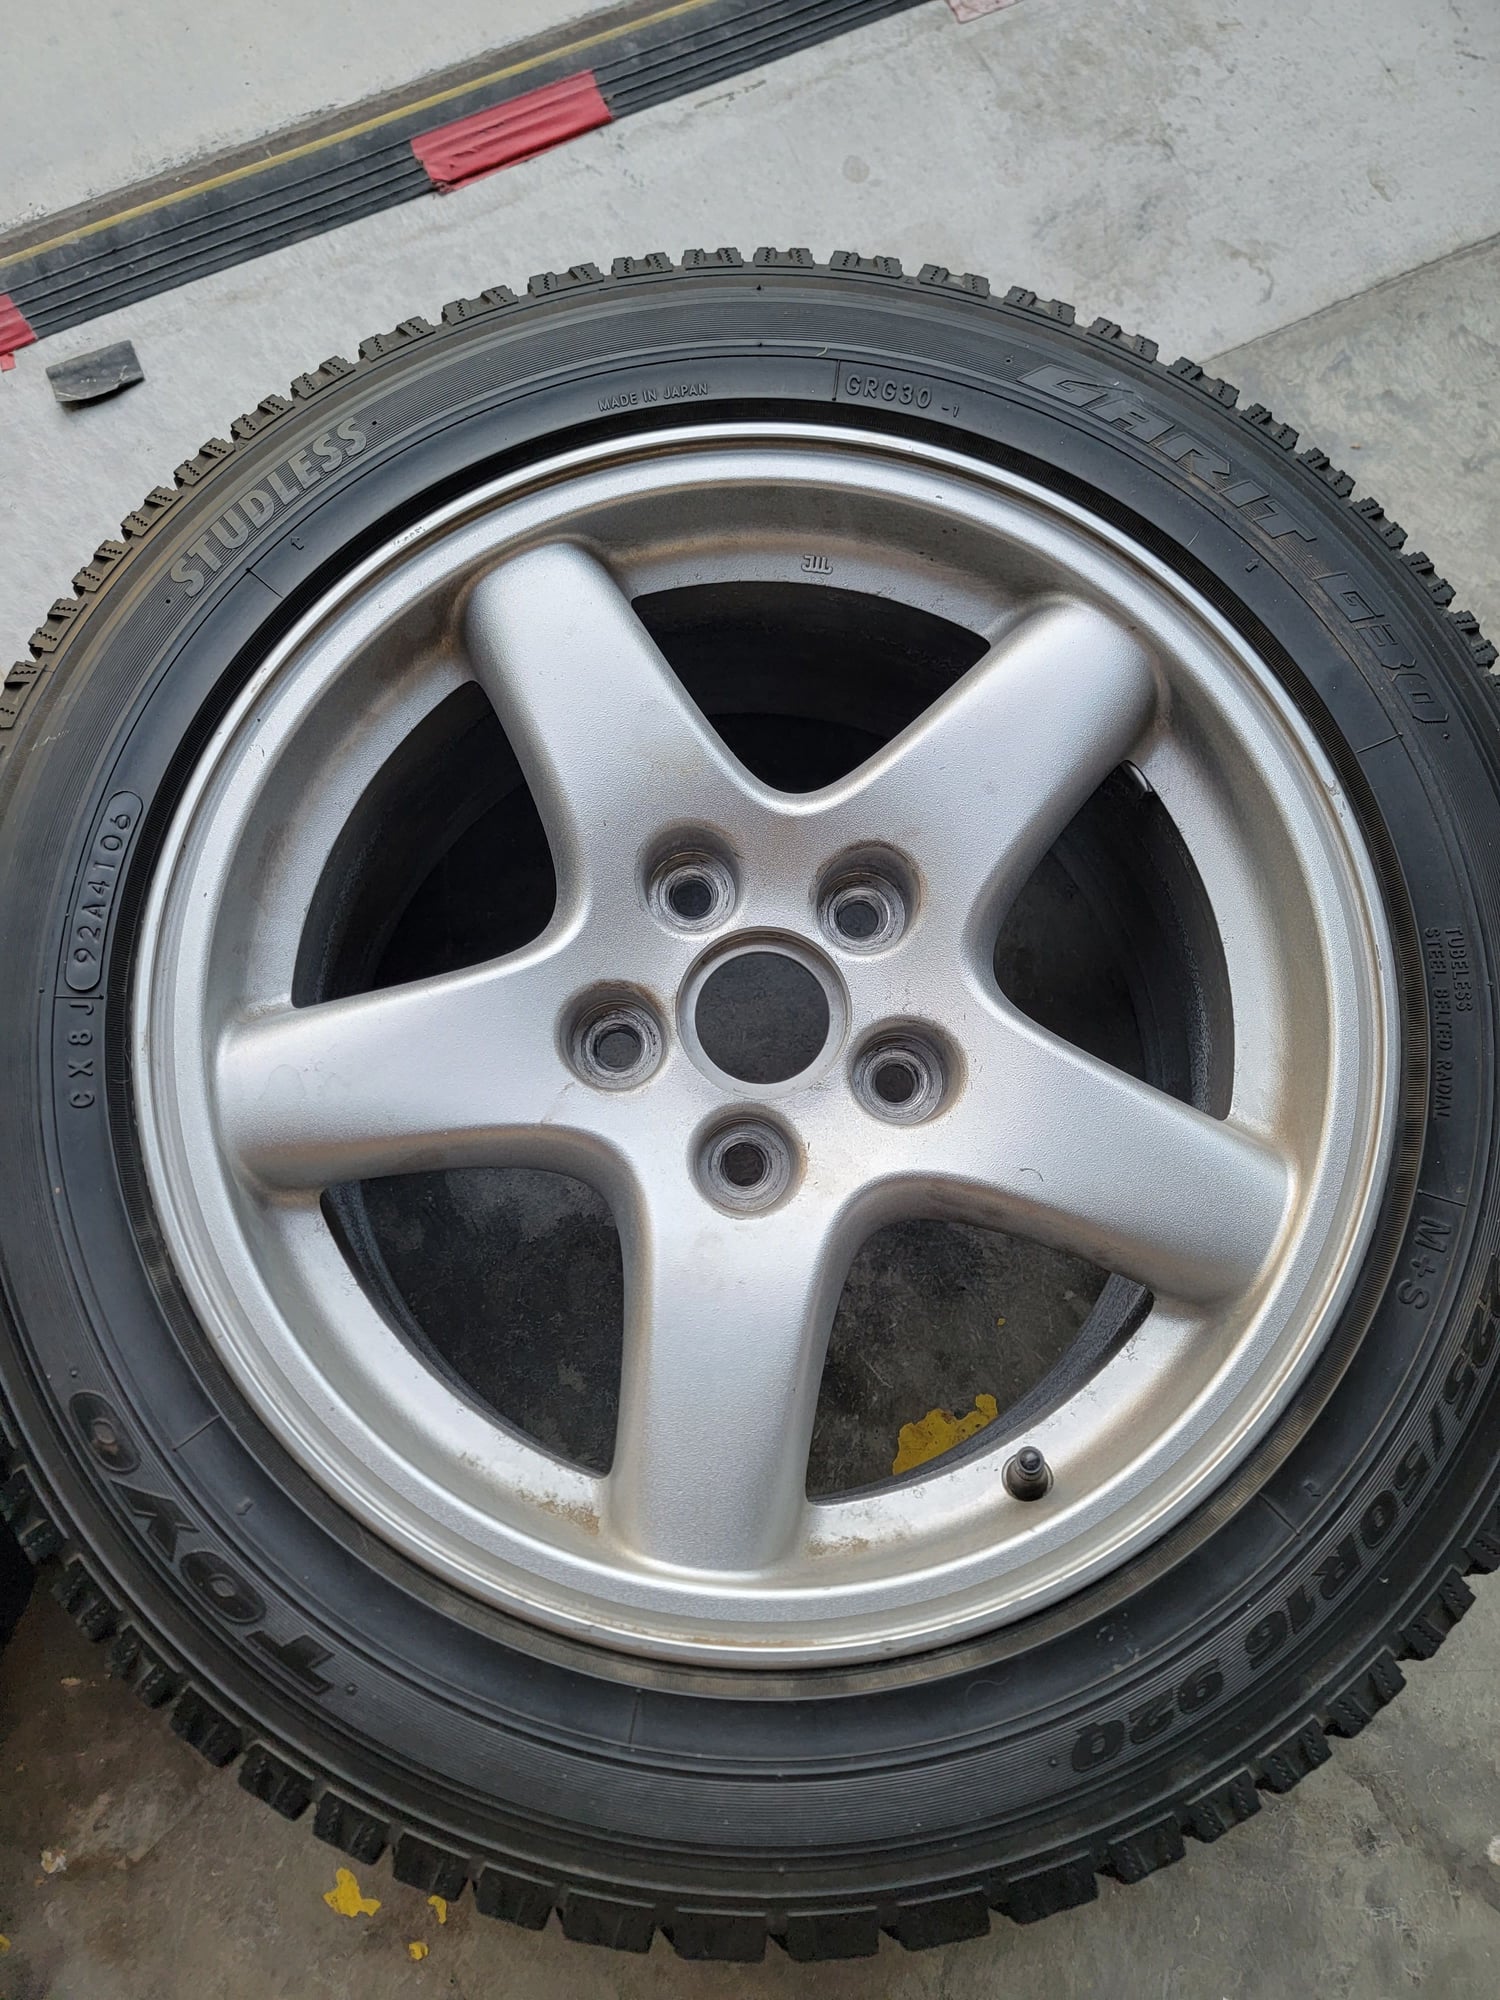 1994 Mazda RX-7 - Rx7 series 8 wheels - Wheels and Tires/Axles - $600 - West Harrison, IN 47060, United States